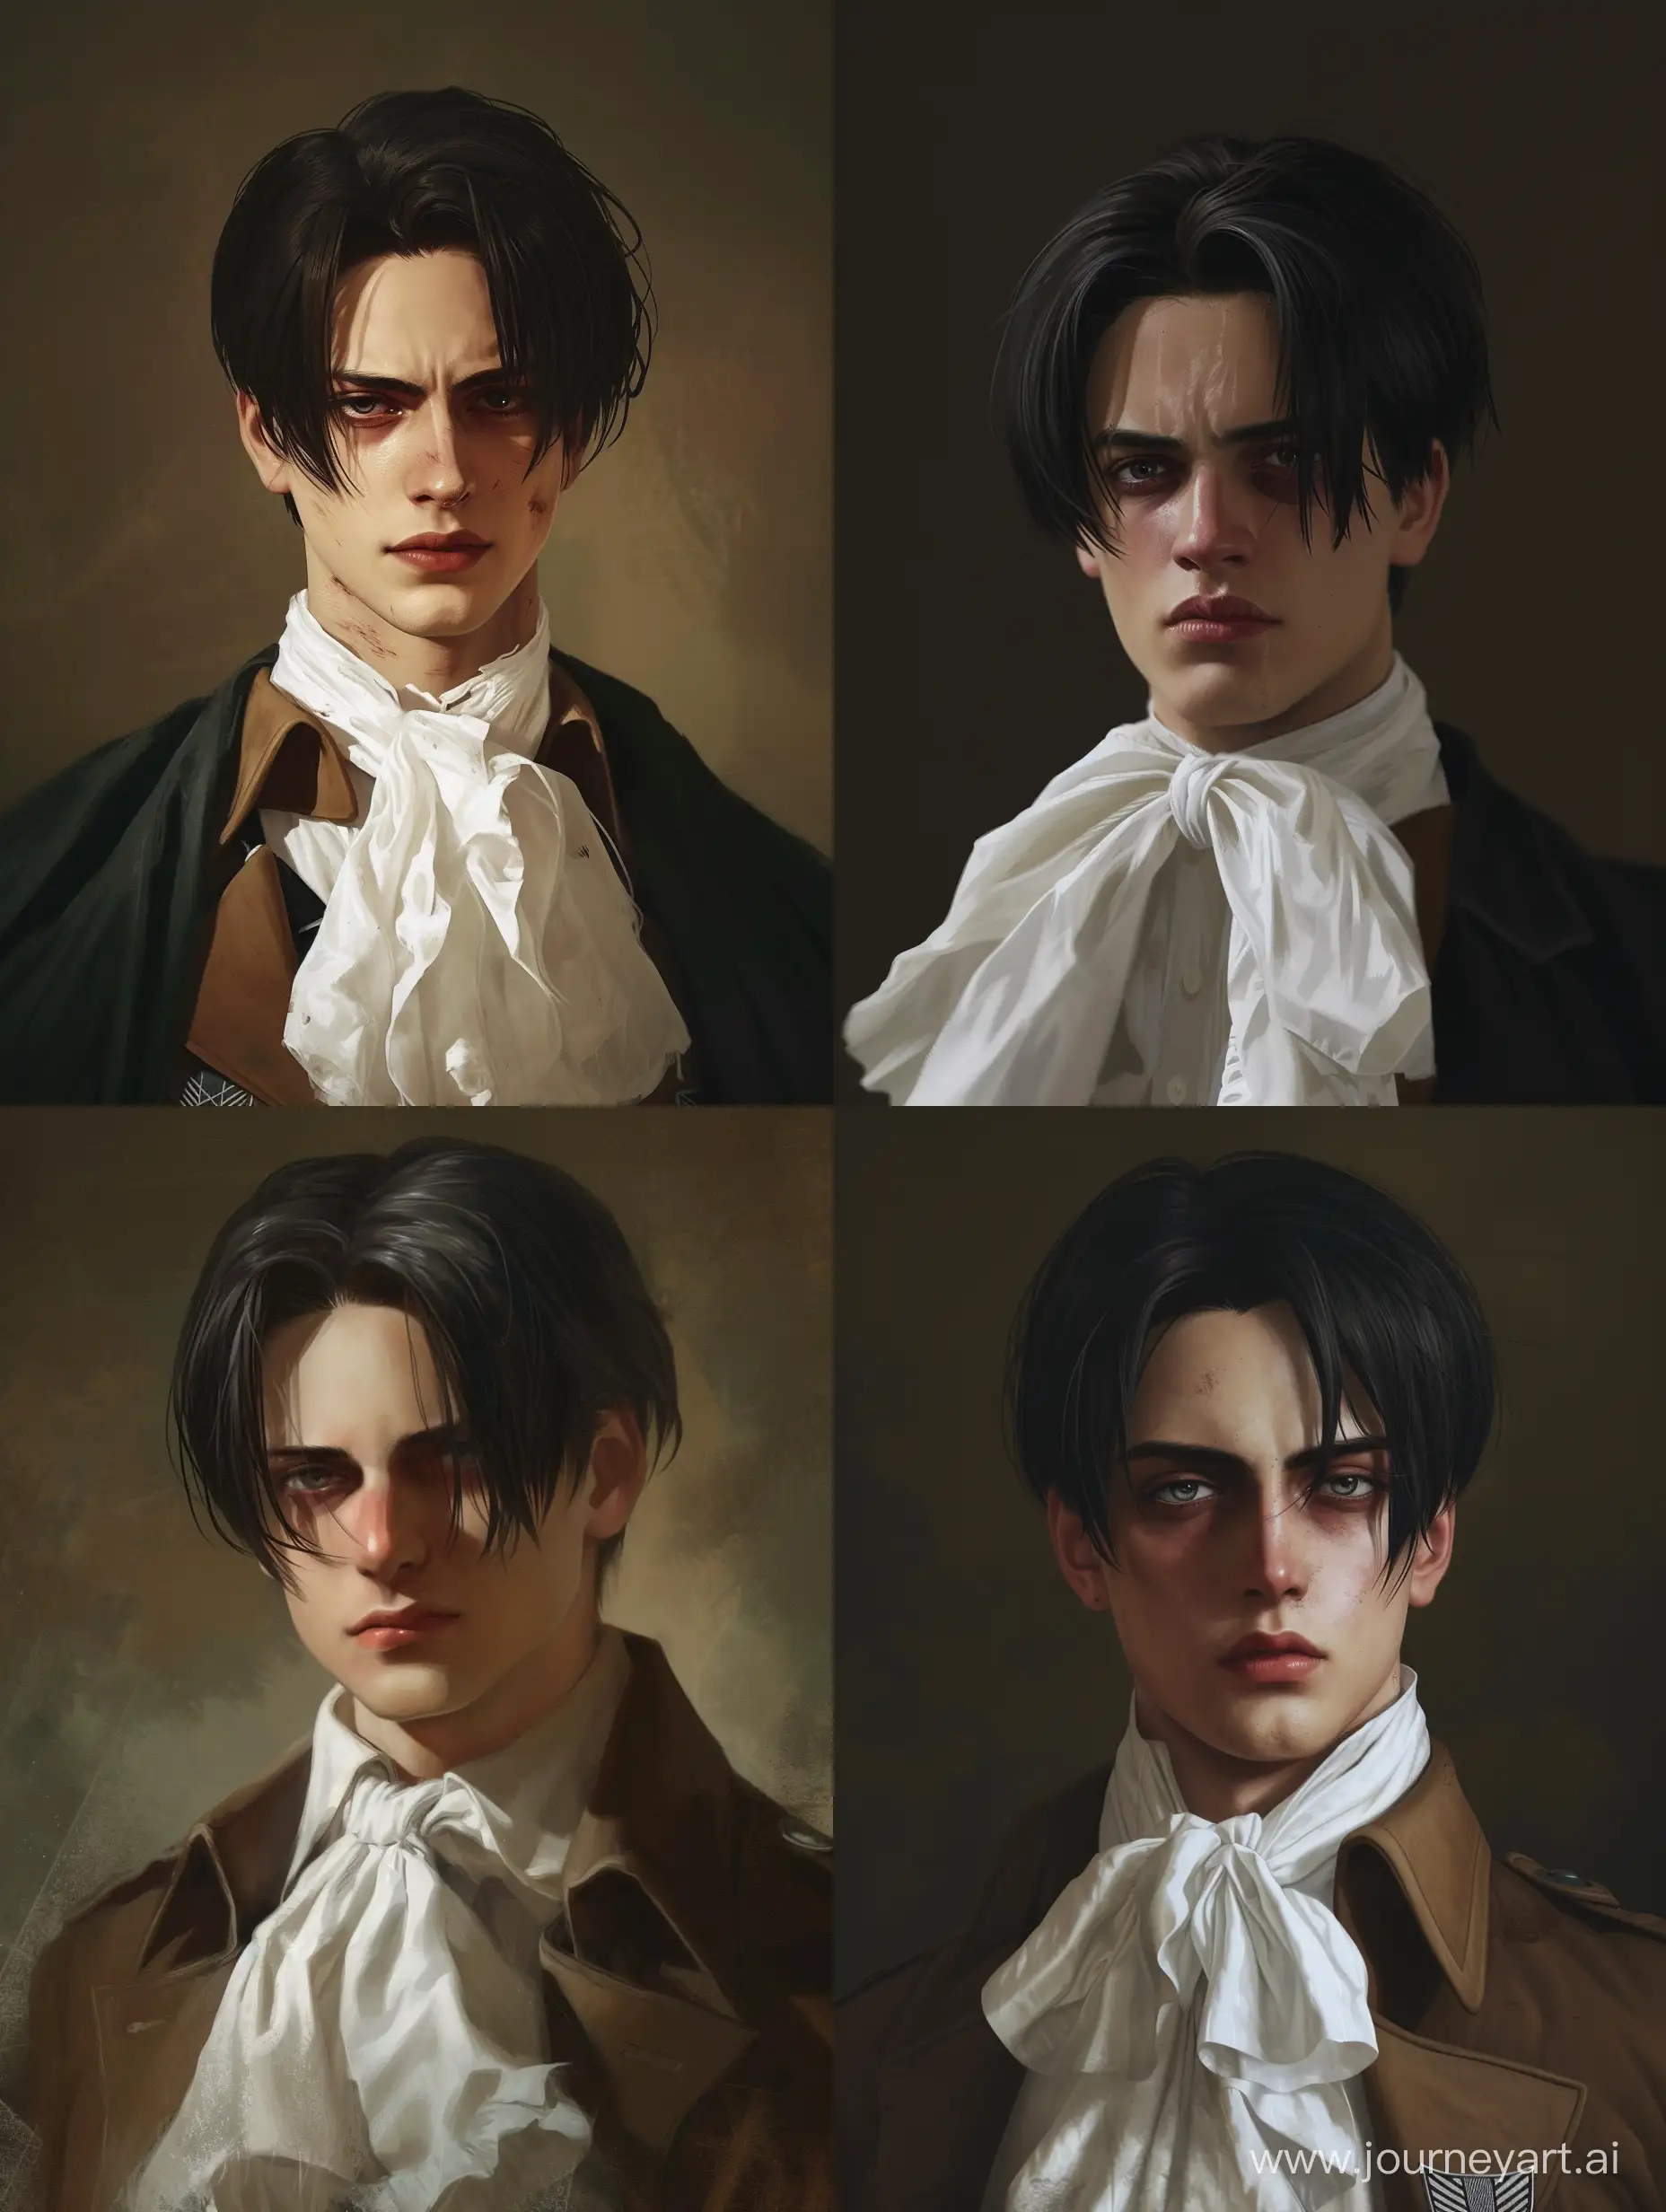 Realistic-Levi-Ackerman-from-Attack-on-Titan-Portrait-with-Mocking-Smirk